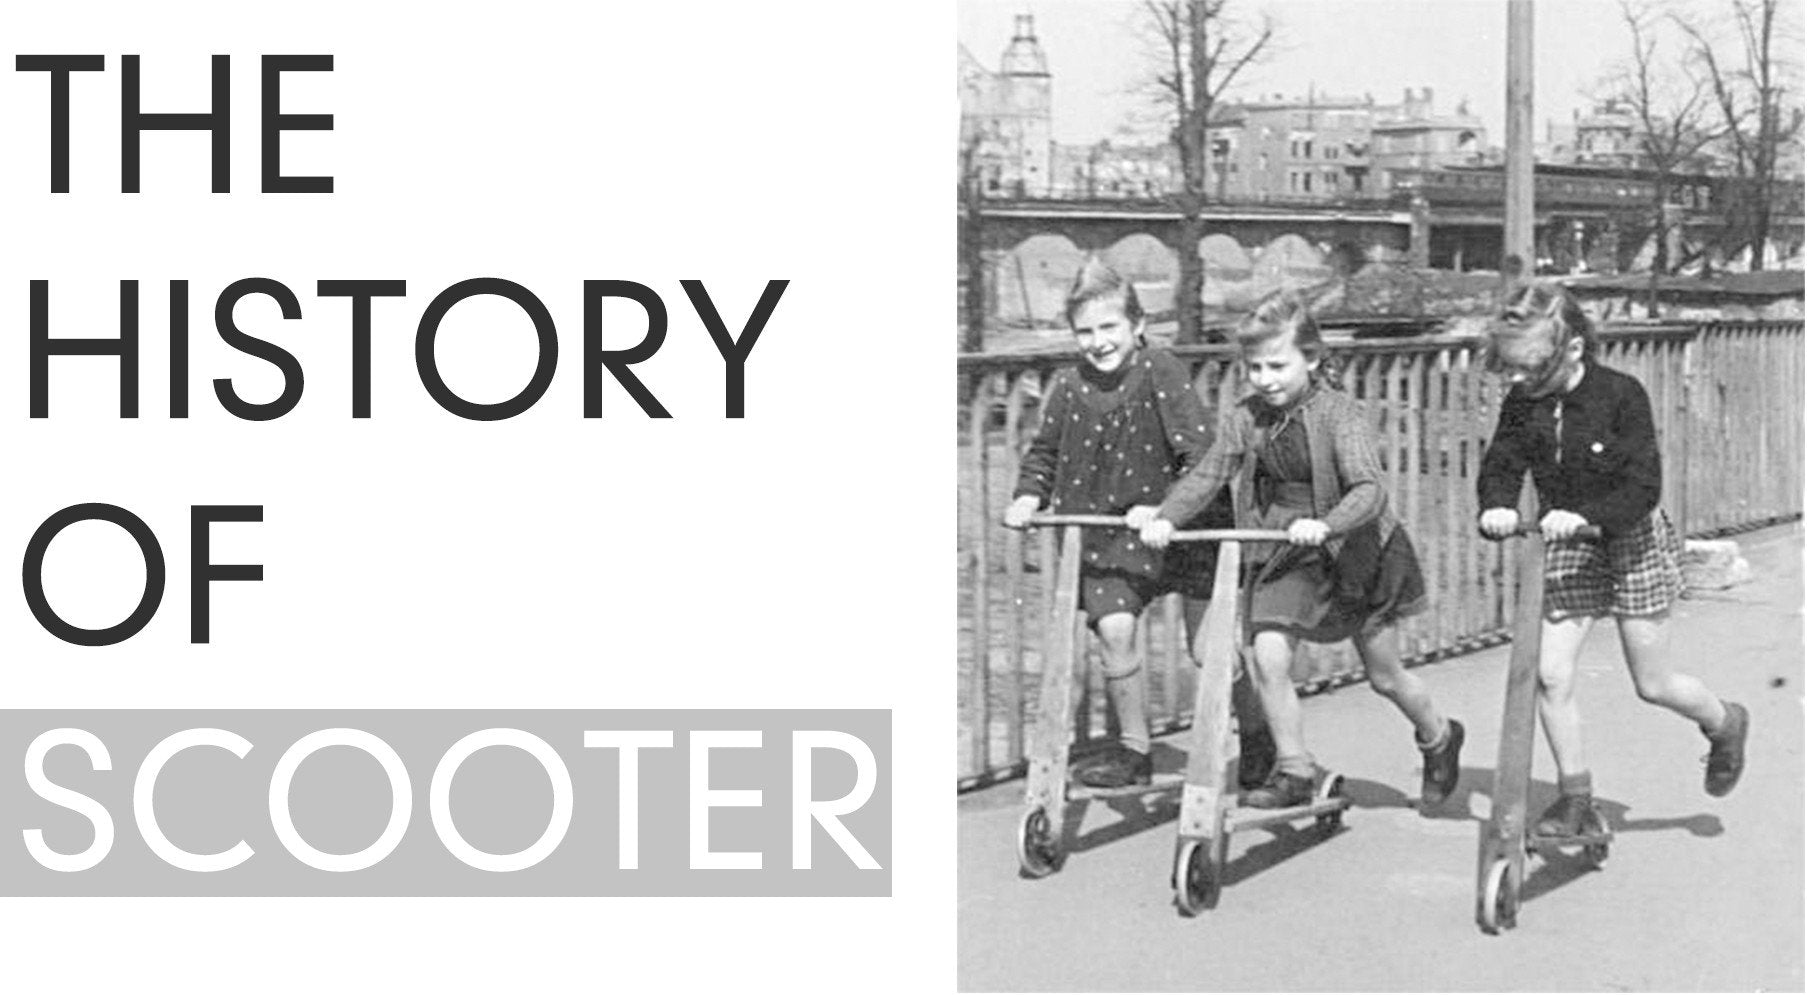 The History of Scooter (i)